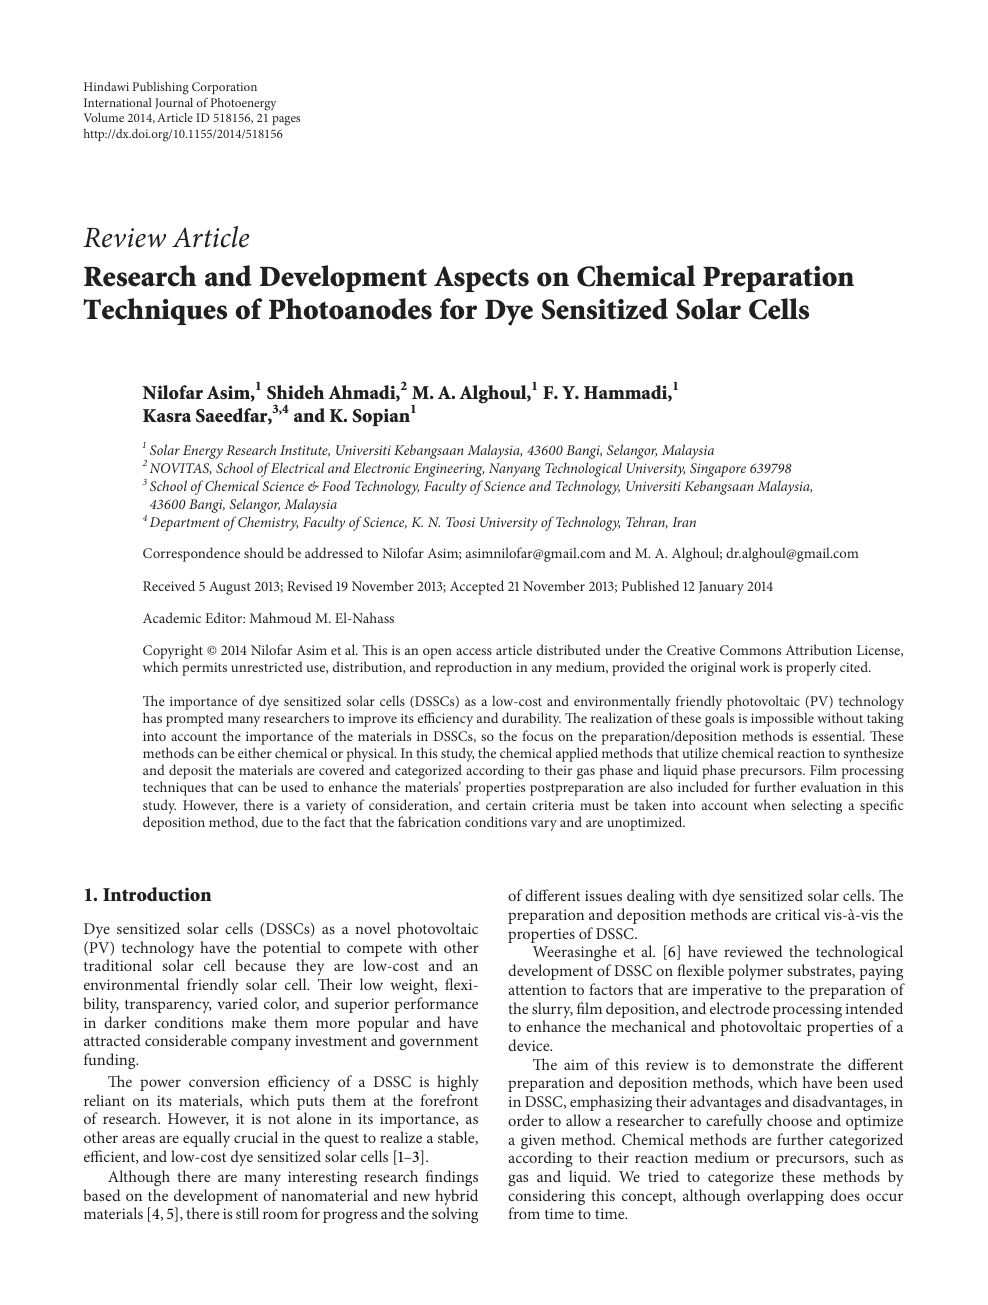 Research And Development Aspects On Chemical Preparation Techniques Of Photoanodes For Dye Sensitized Solar Cells Topic Of Research Paper In Nano Technology Download Scholarly Article Pdf And Read For Free On Cyberleninka